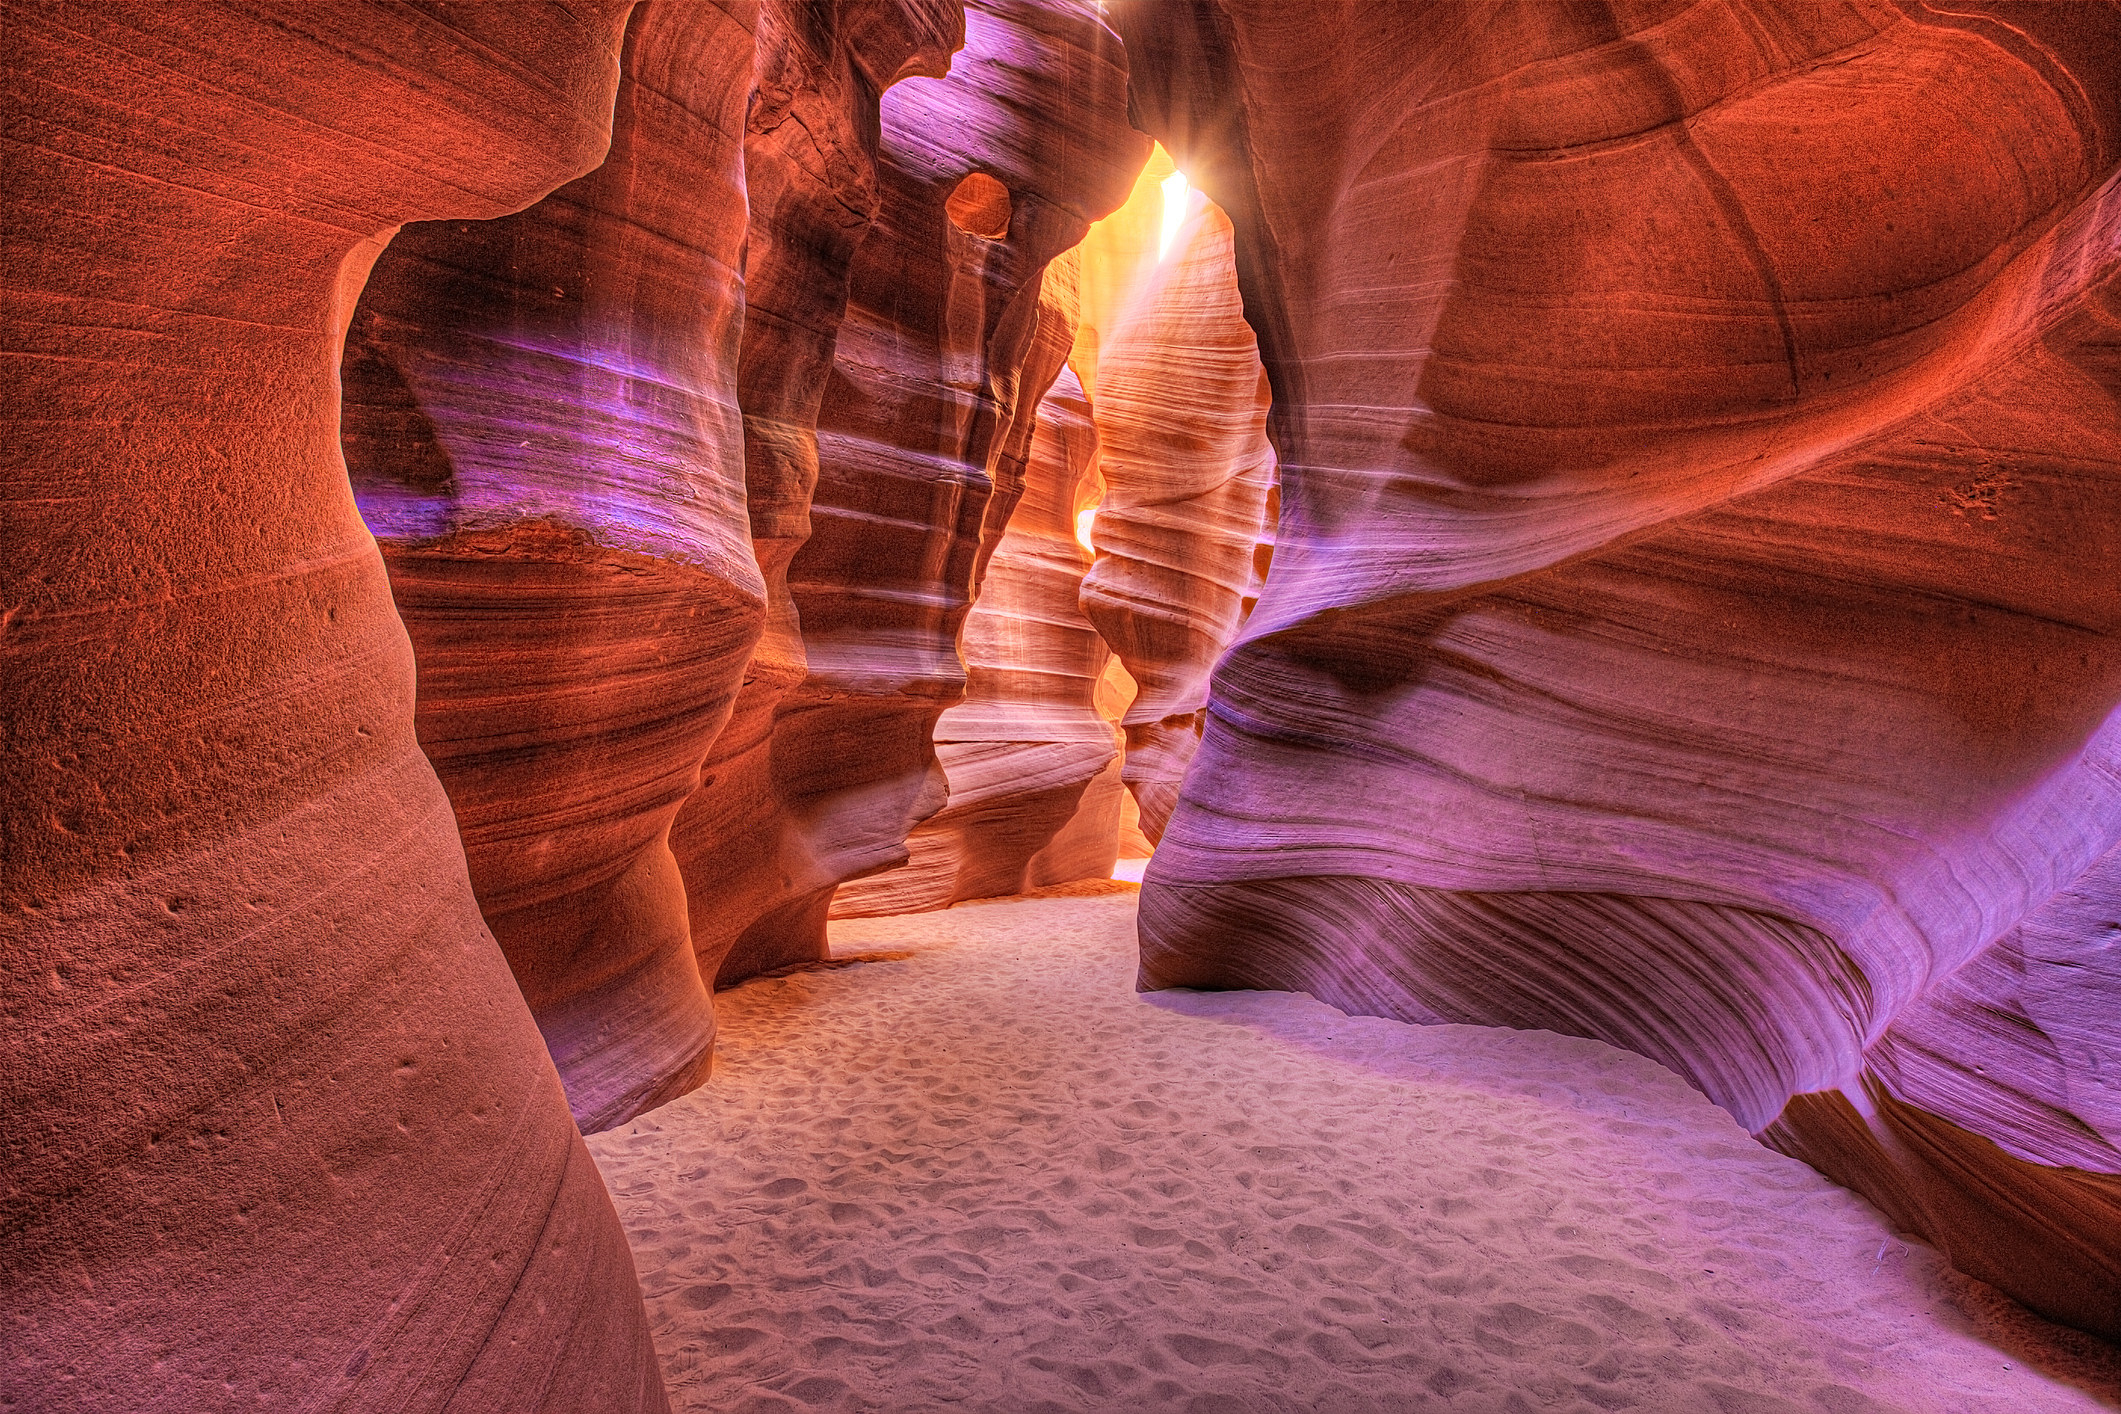 an underground canyon with vibrant colored walls and light shining through a crack in the roof